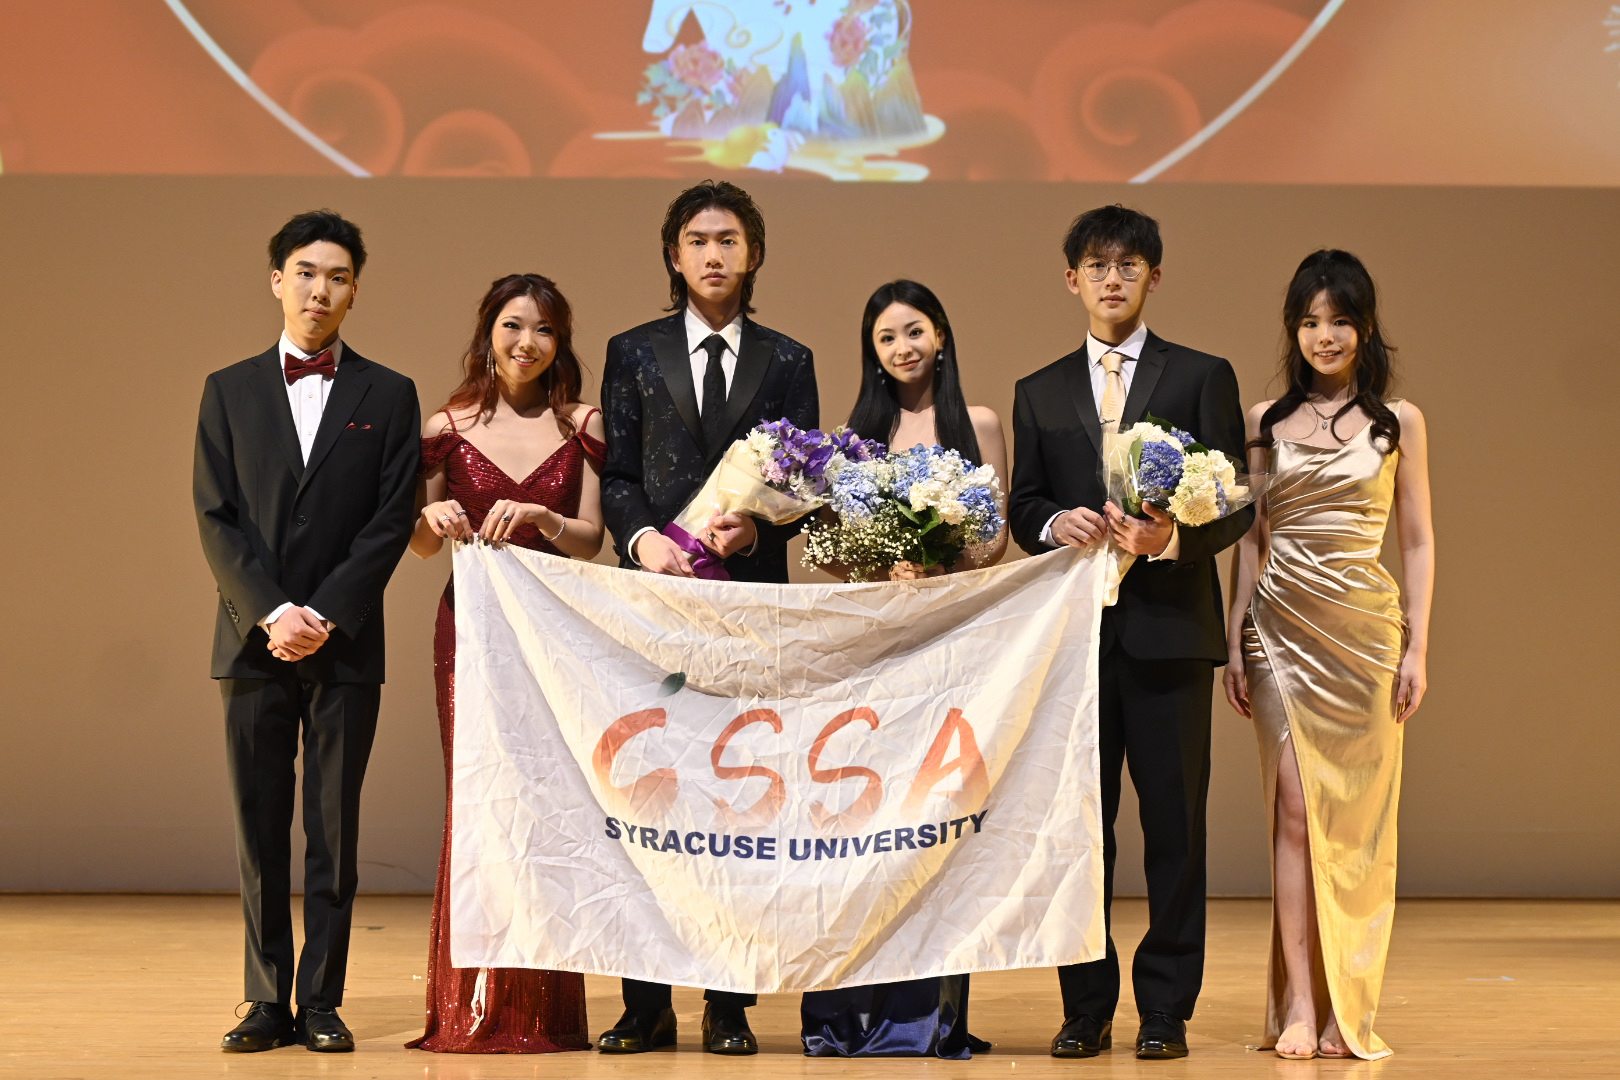 Members of the Chinese Student and Scholar Association pose with a banner that says "CSSA Syracuse University" at their Chinese New Year Gala